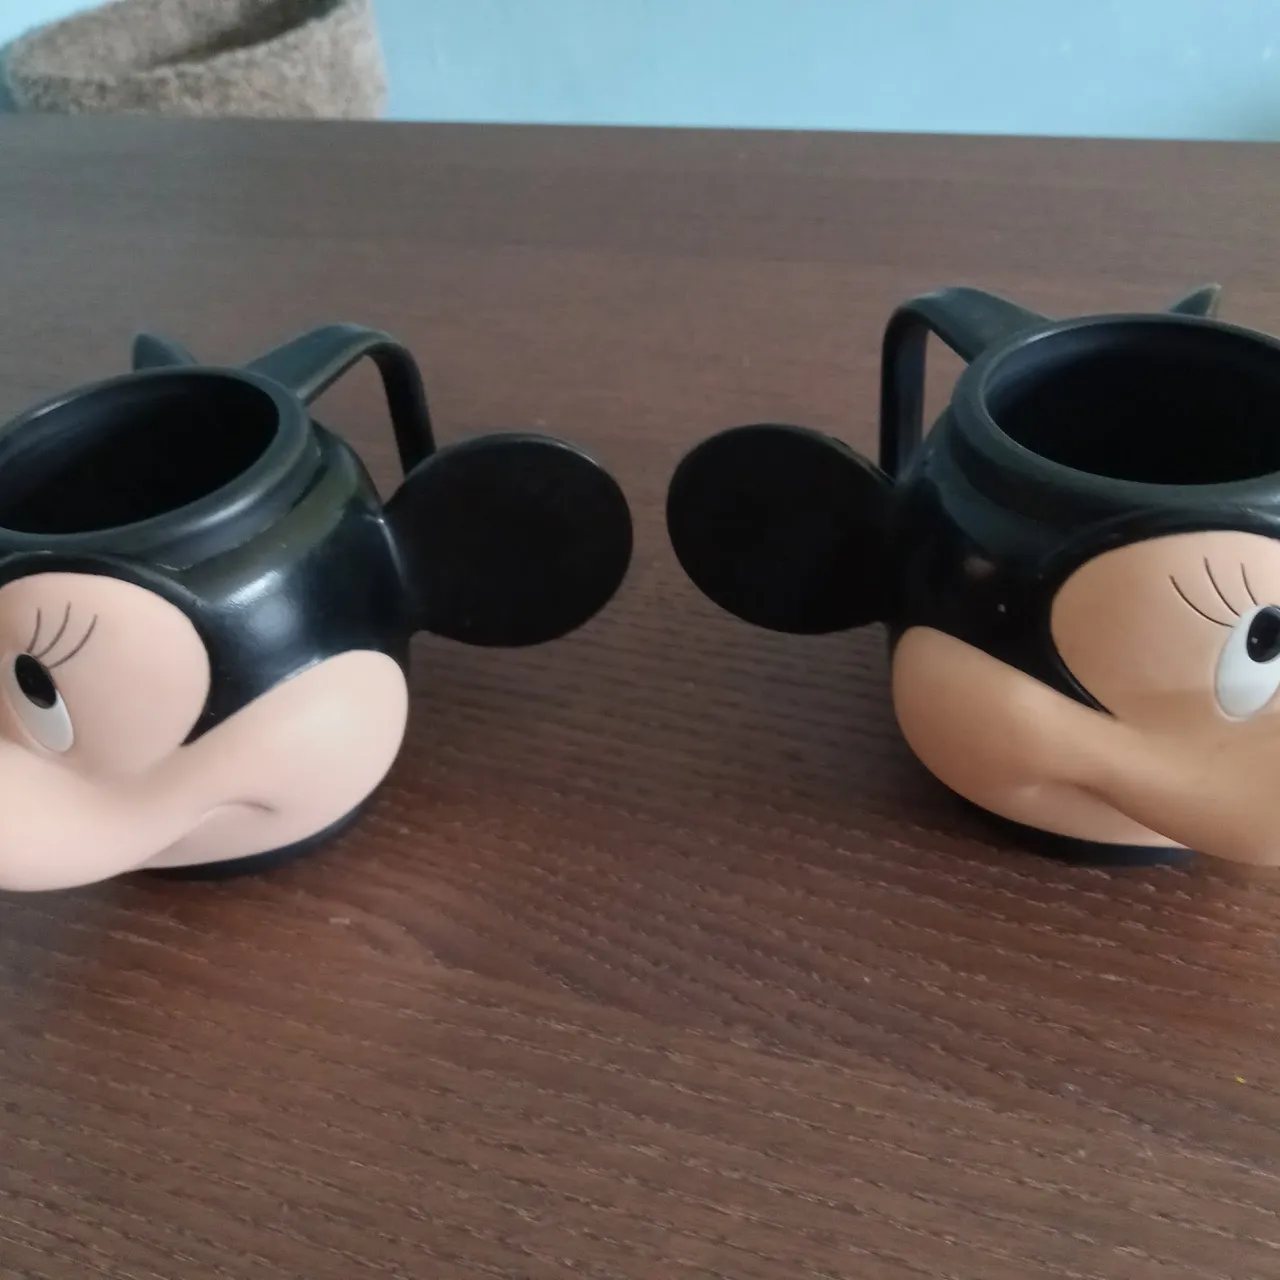 Mickey Mouse Cups photo 1